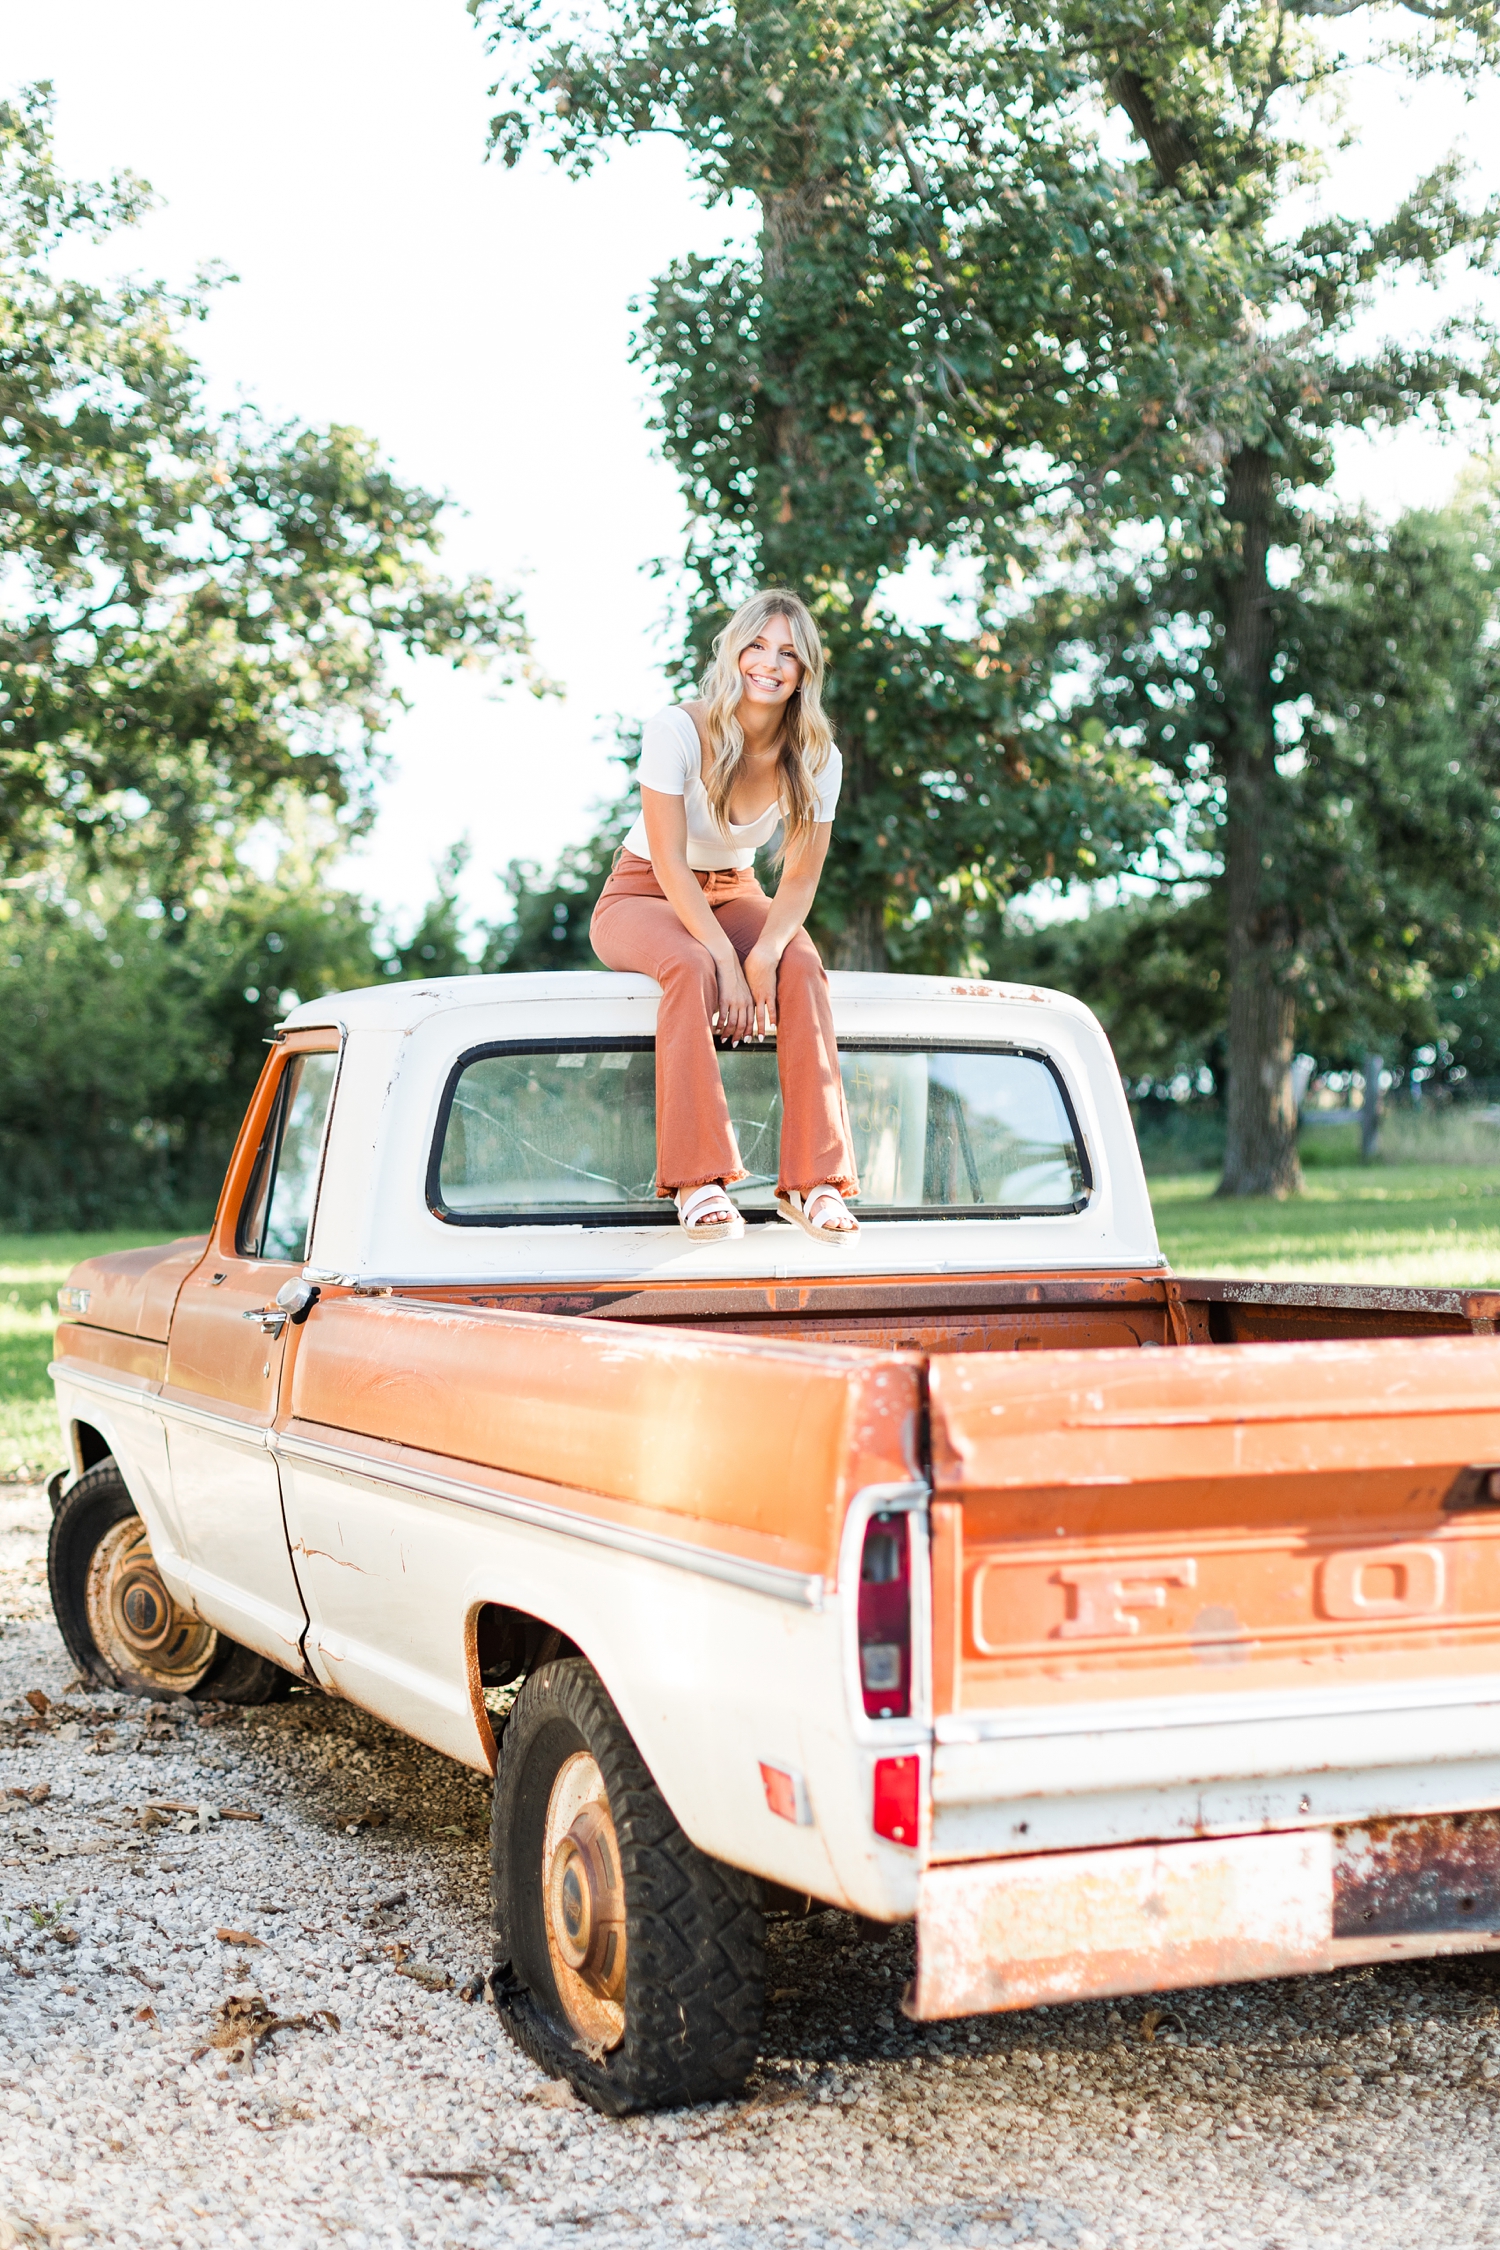 Eden, wearing burnt orange bell bottoms, sits on top of a 1970's two tone orange and white Ford truck | CB Studio